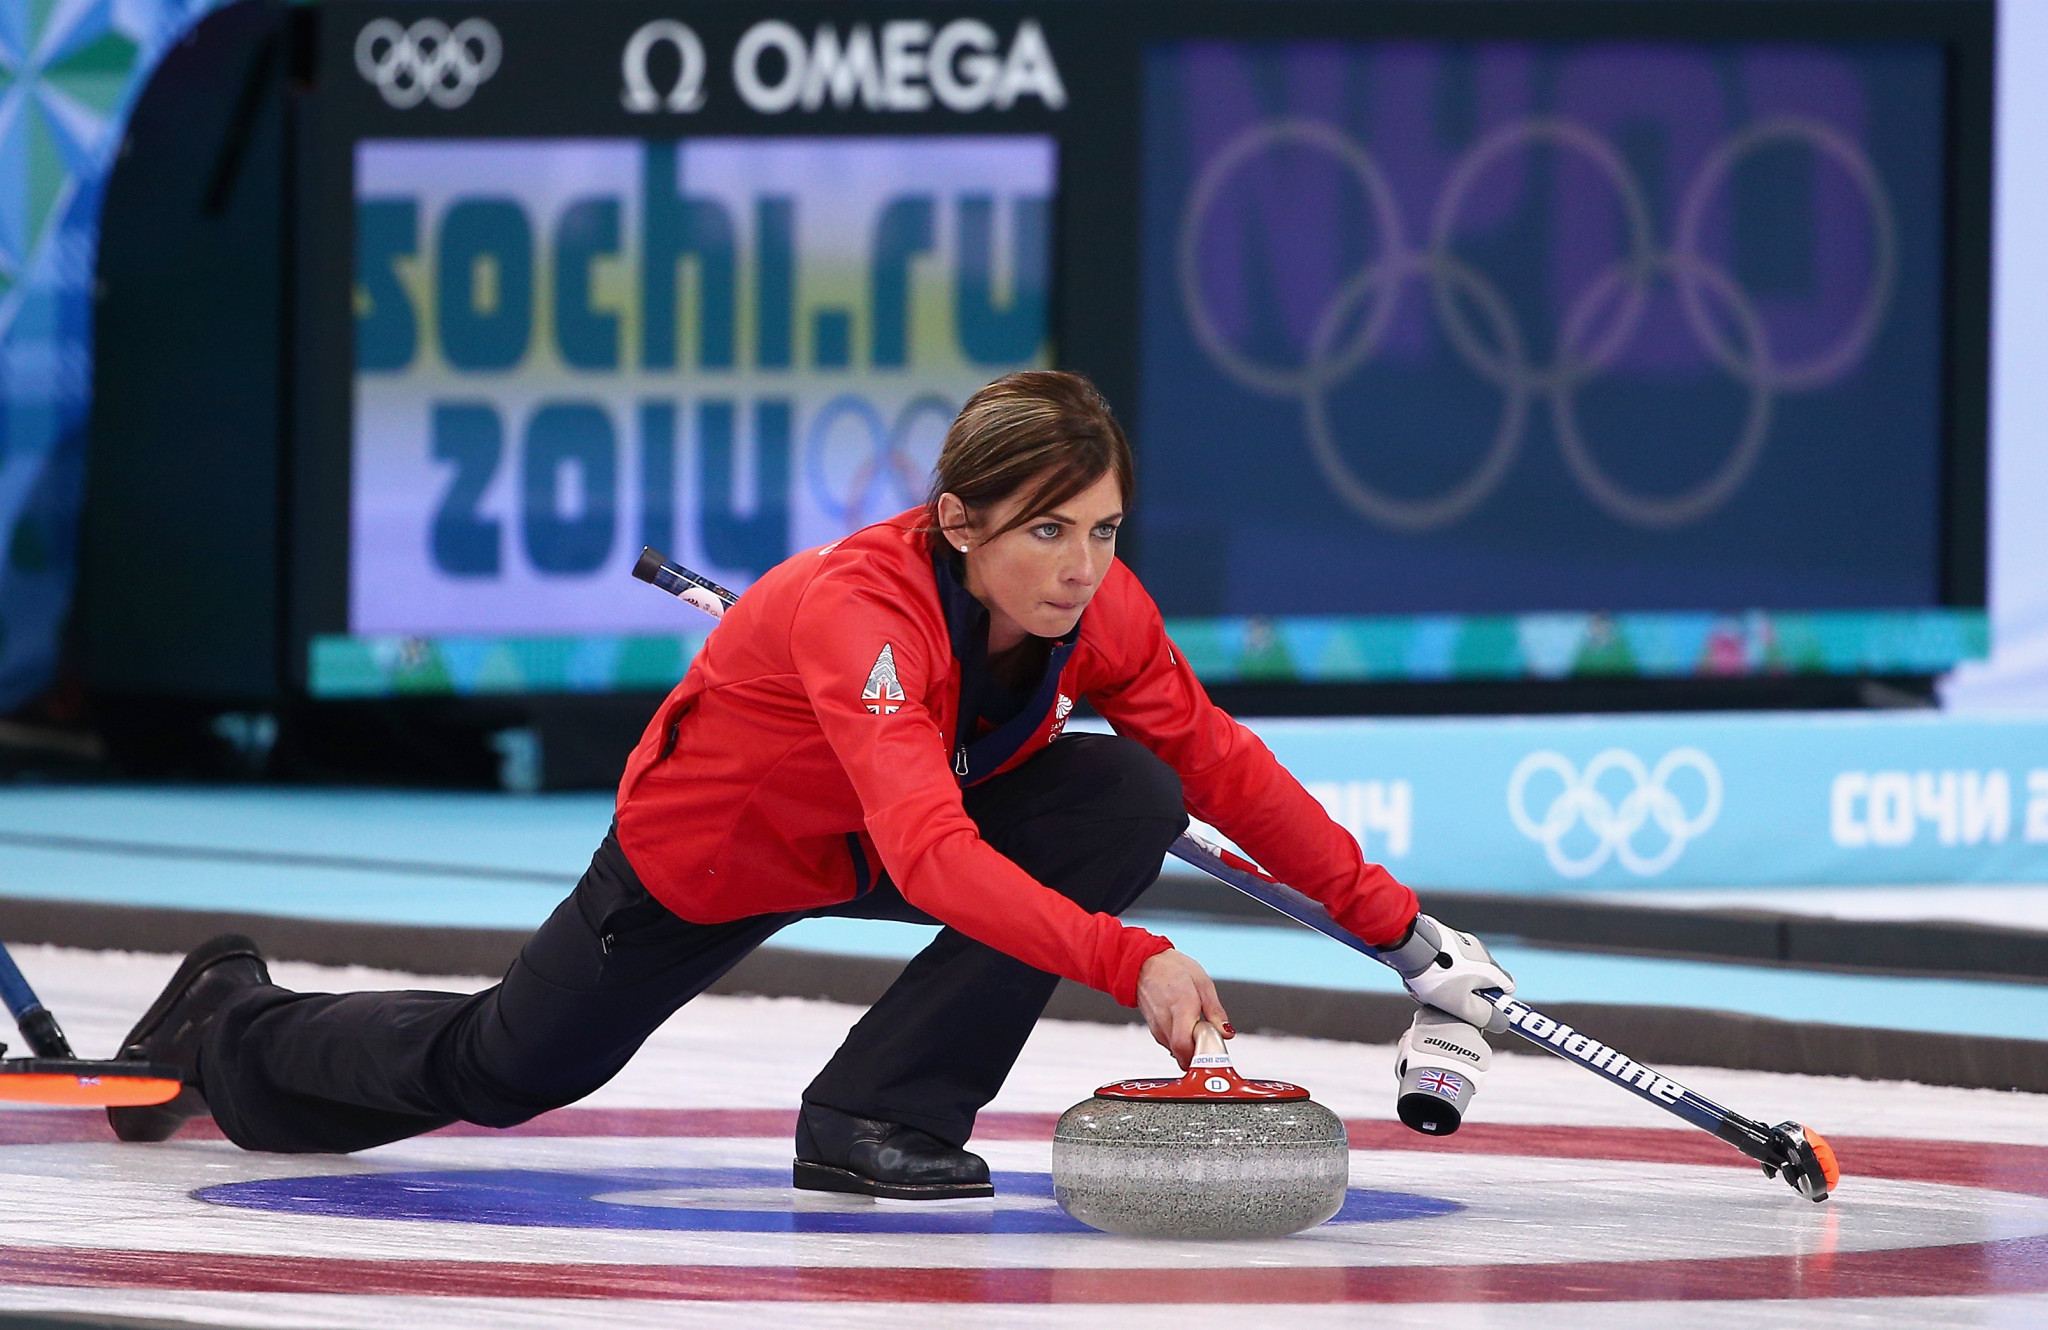 Eve Muirhead says more should be done to encourage participation in curling in Britain ©Getty Images